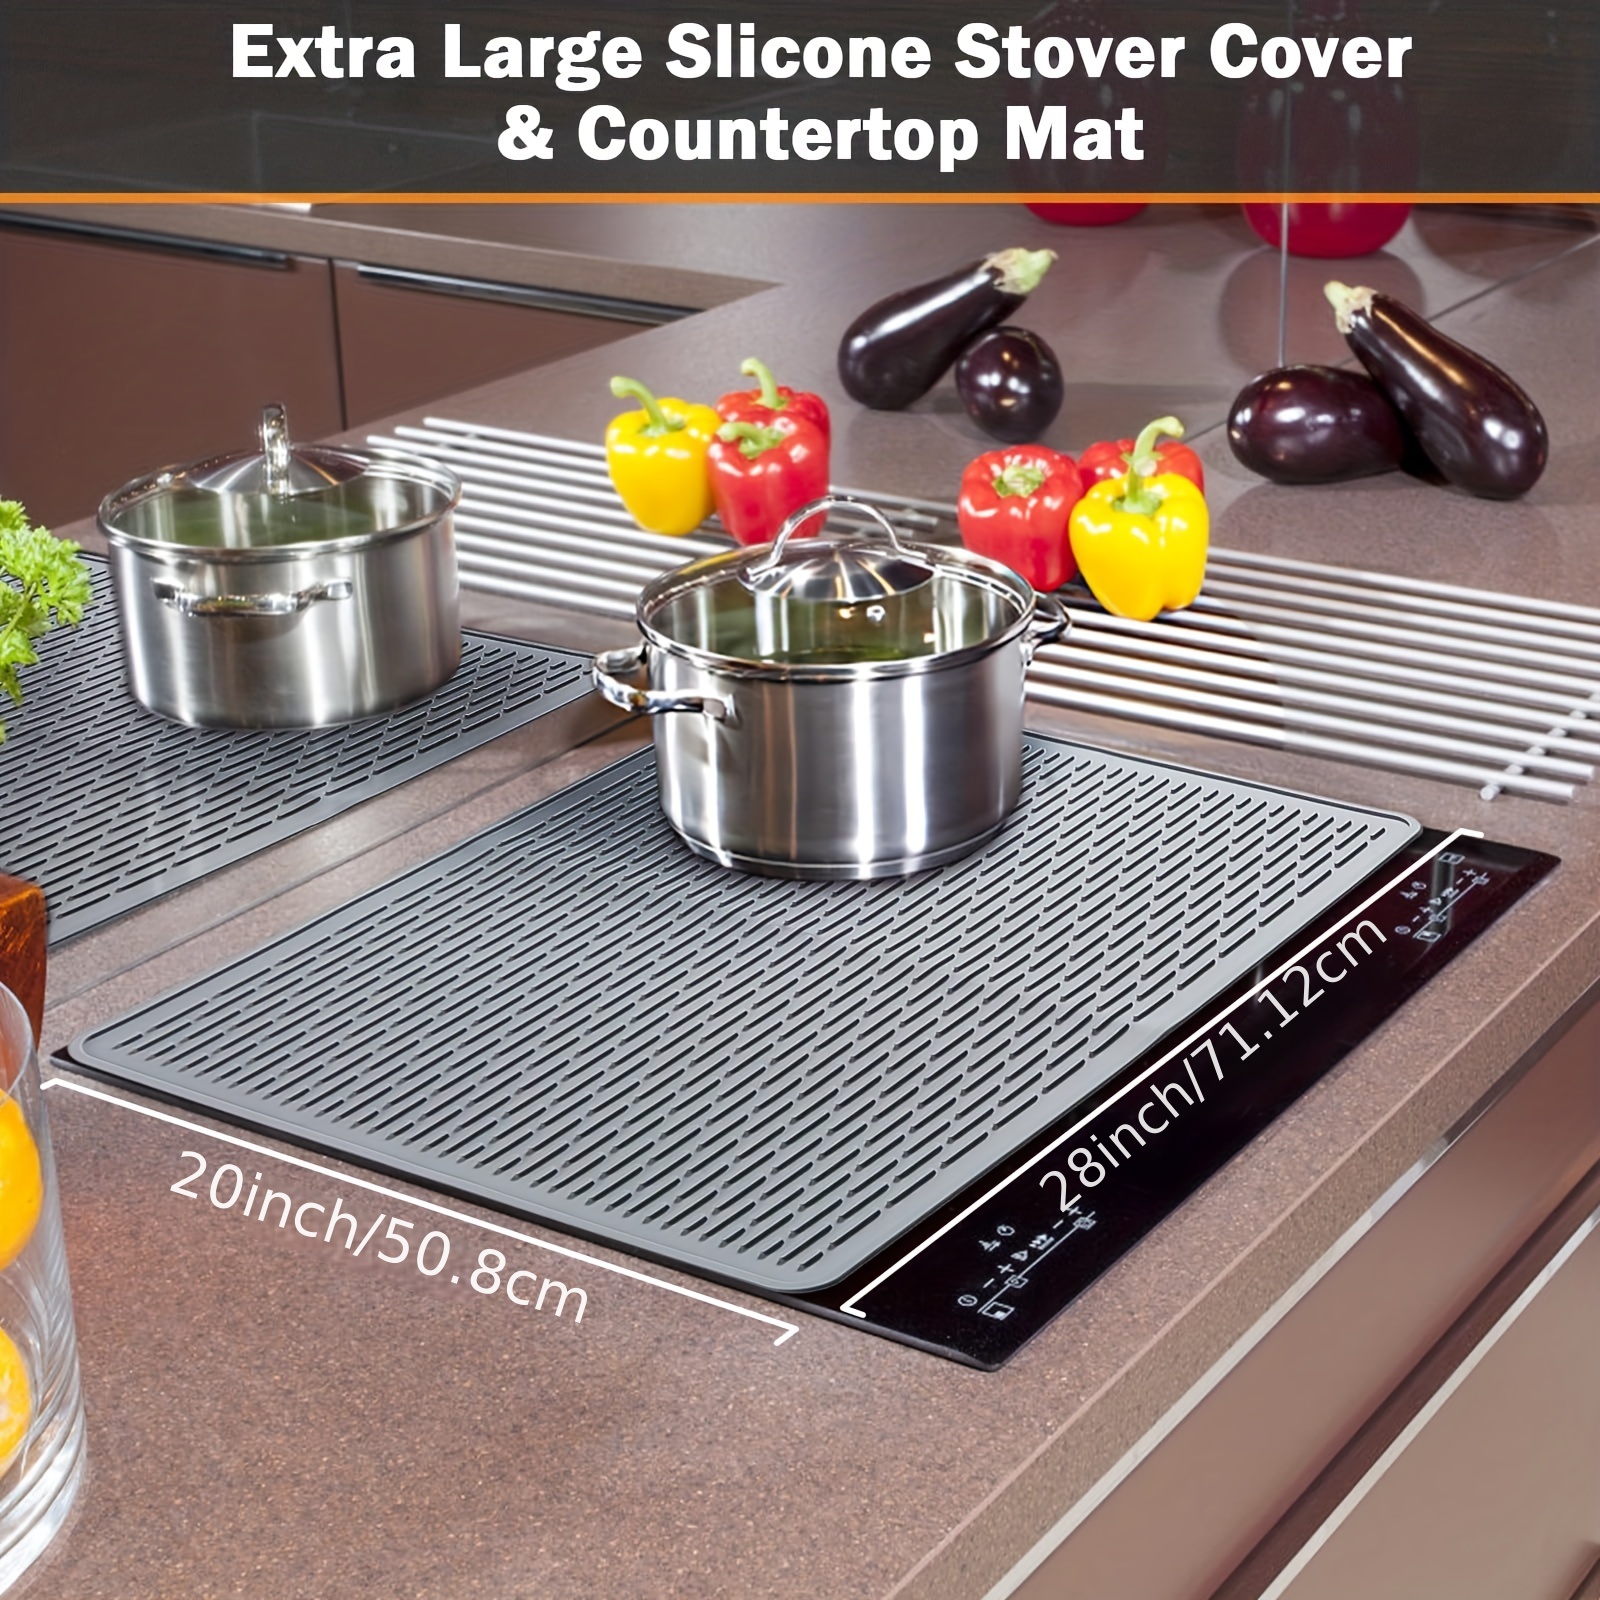 Silicone Stove Top Cover For Electric Stove, Extra Large Silicone